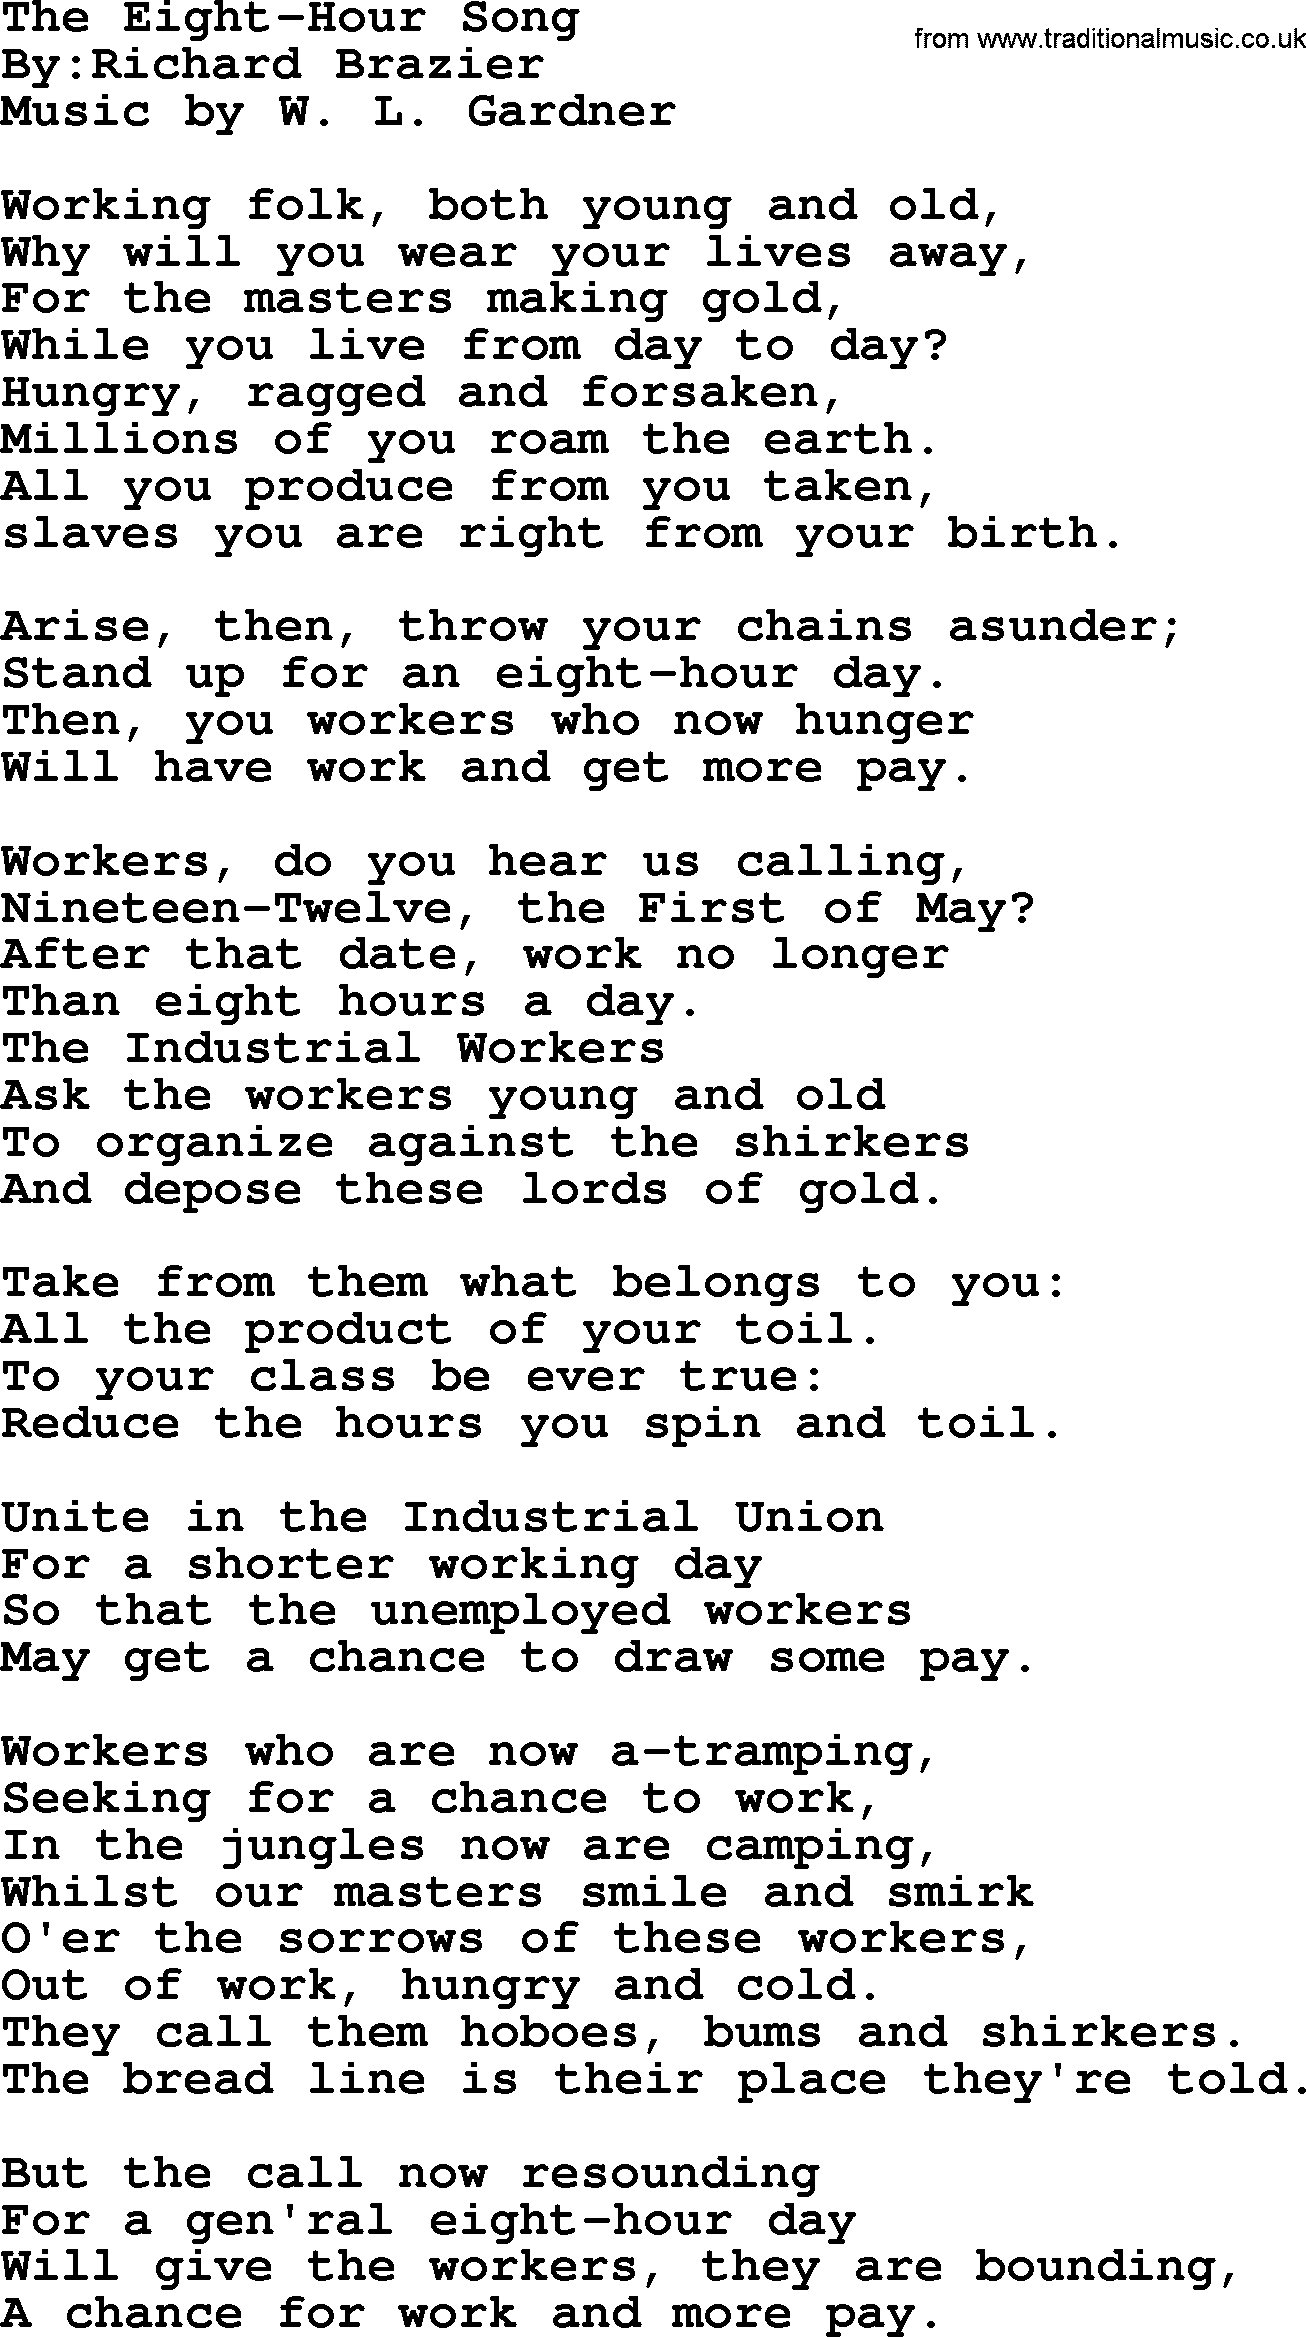 Political, Solidarity, Workers or Union song: The Eight-hour Song, lyrics